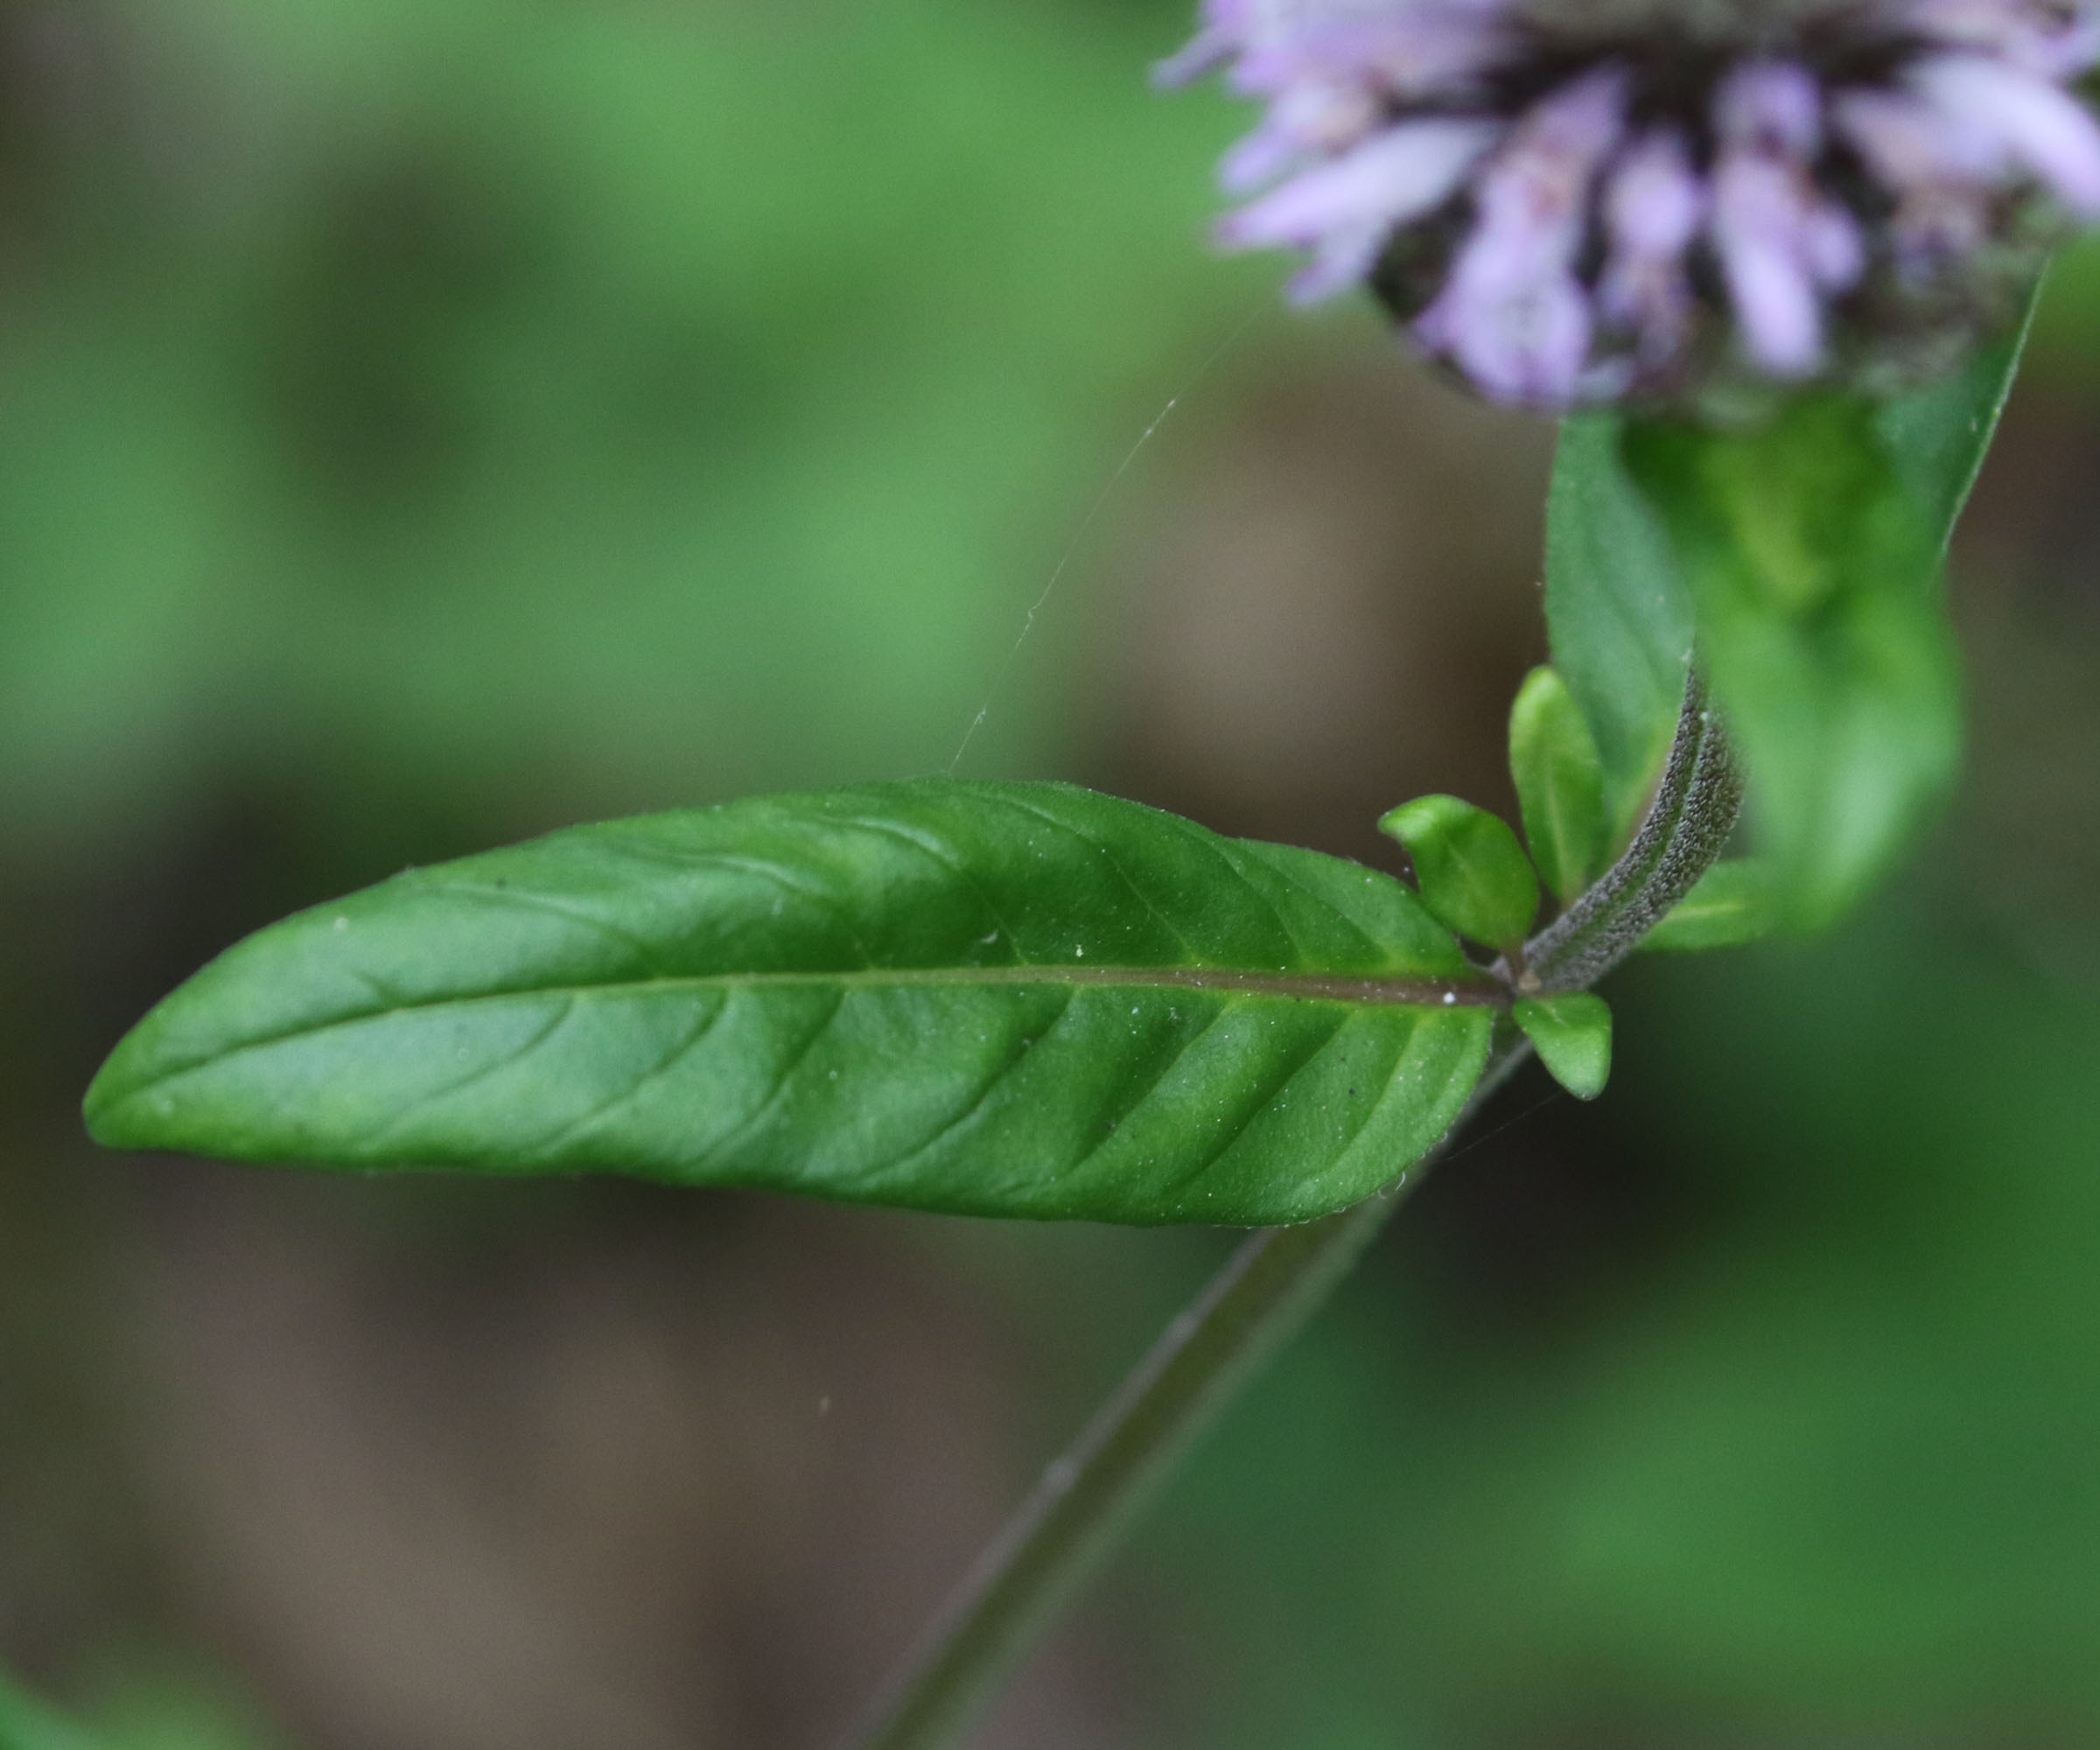 The Scientific Name is Blephilia ciliata. You will likely hear them called Downy Woodmint, Downy Pagoda-plant, Ohio Horsemint. This picture shows the Paired leaves are lanceolate to elliptic, sparsely hairy, and fragrant; short petioles connect to a  downy square stem. of Blephilia ciliata